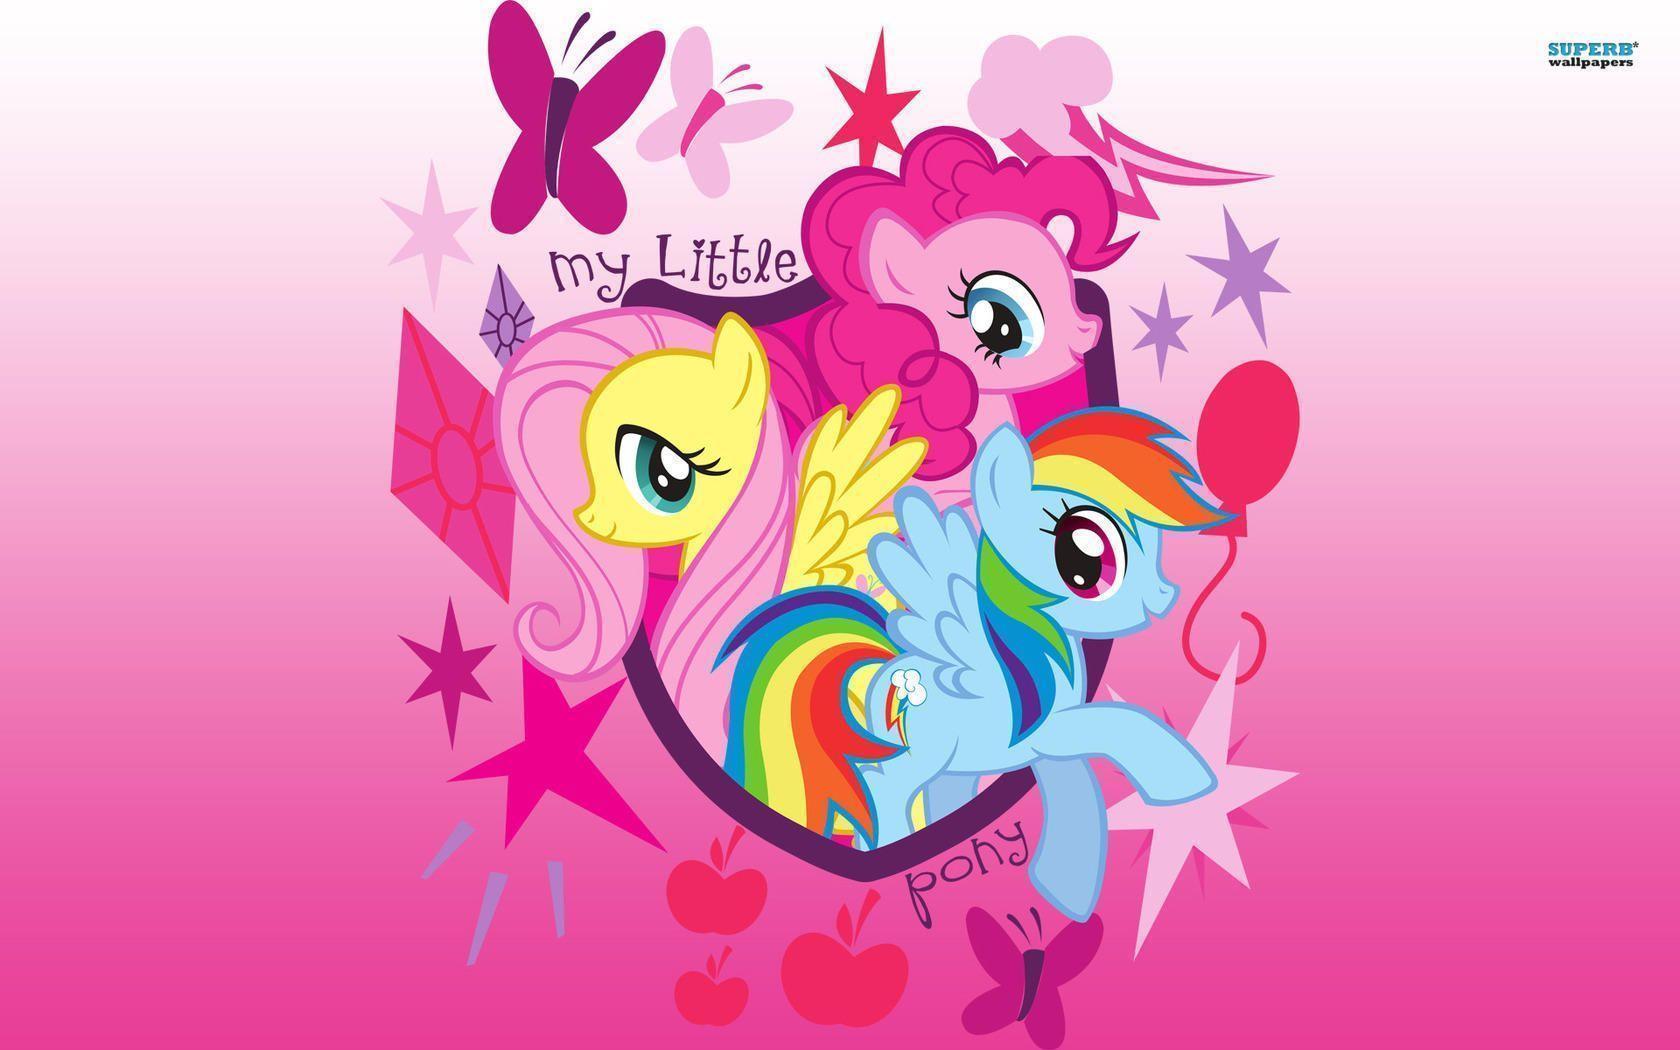 My Little Pony Friendship is Magic Background taken from My Little